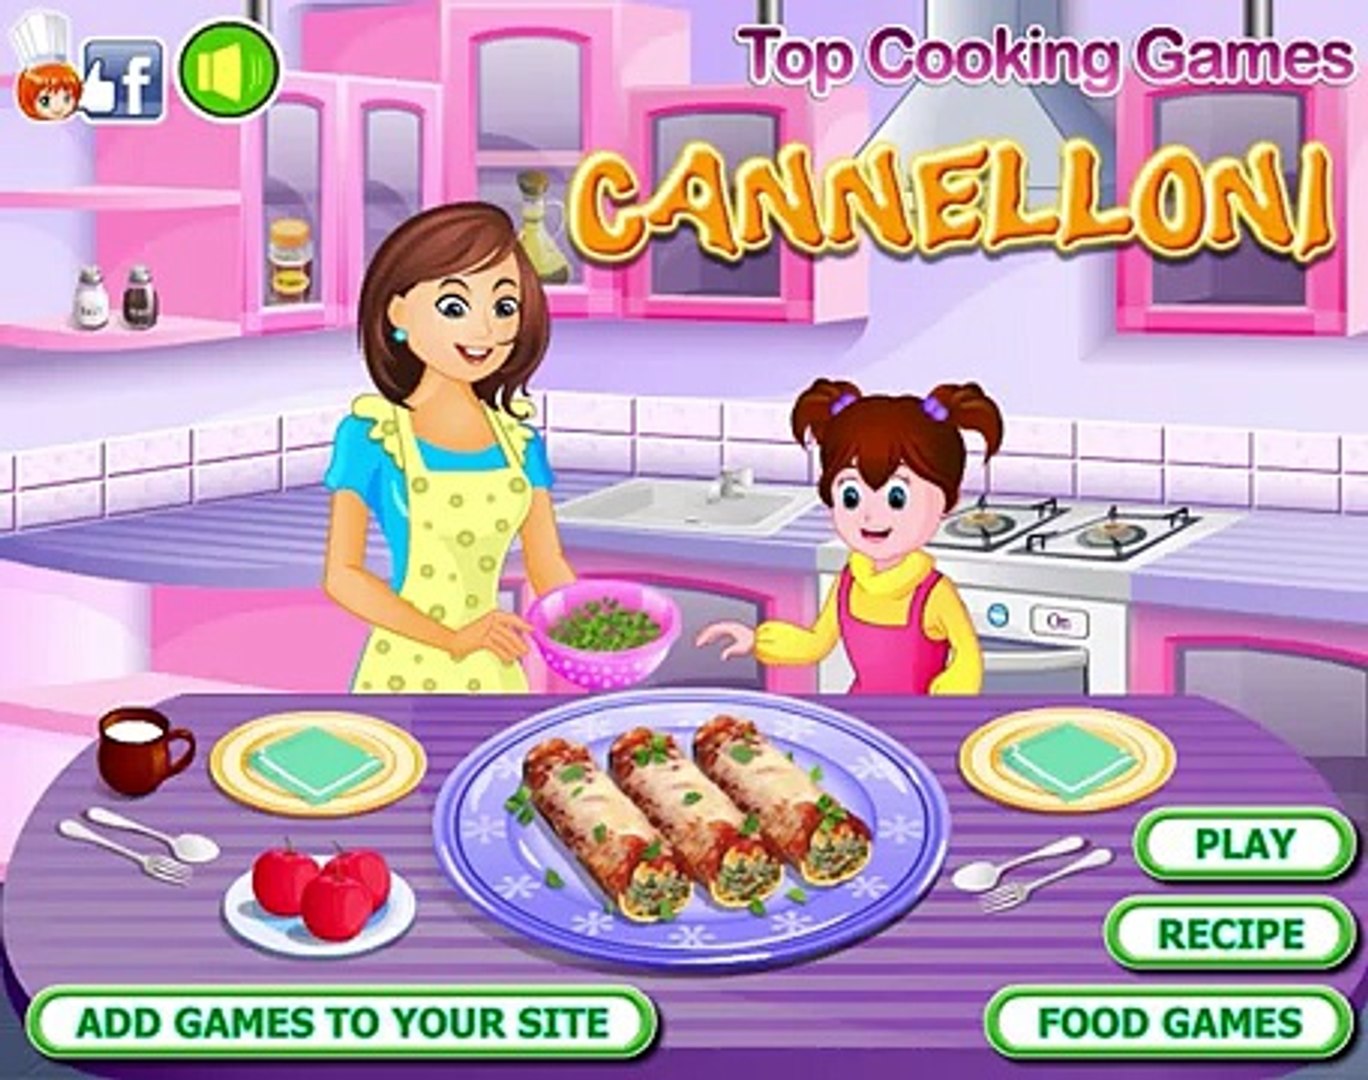 destillation Måler milits Cannelloni Game Video by Top Cooking Games | Fun Game Video For Kids -  video Dailymotion